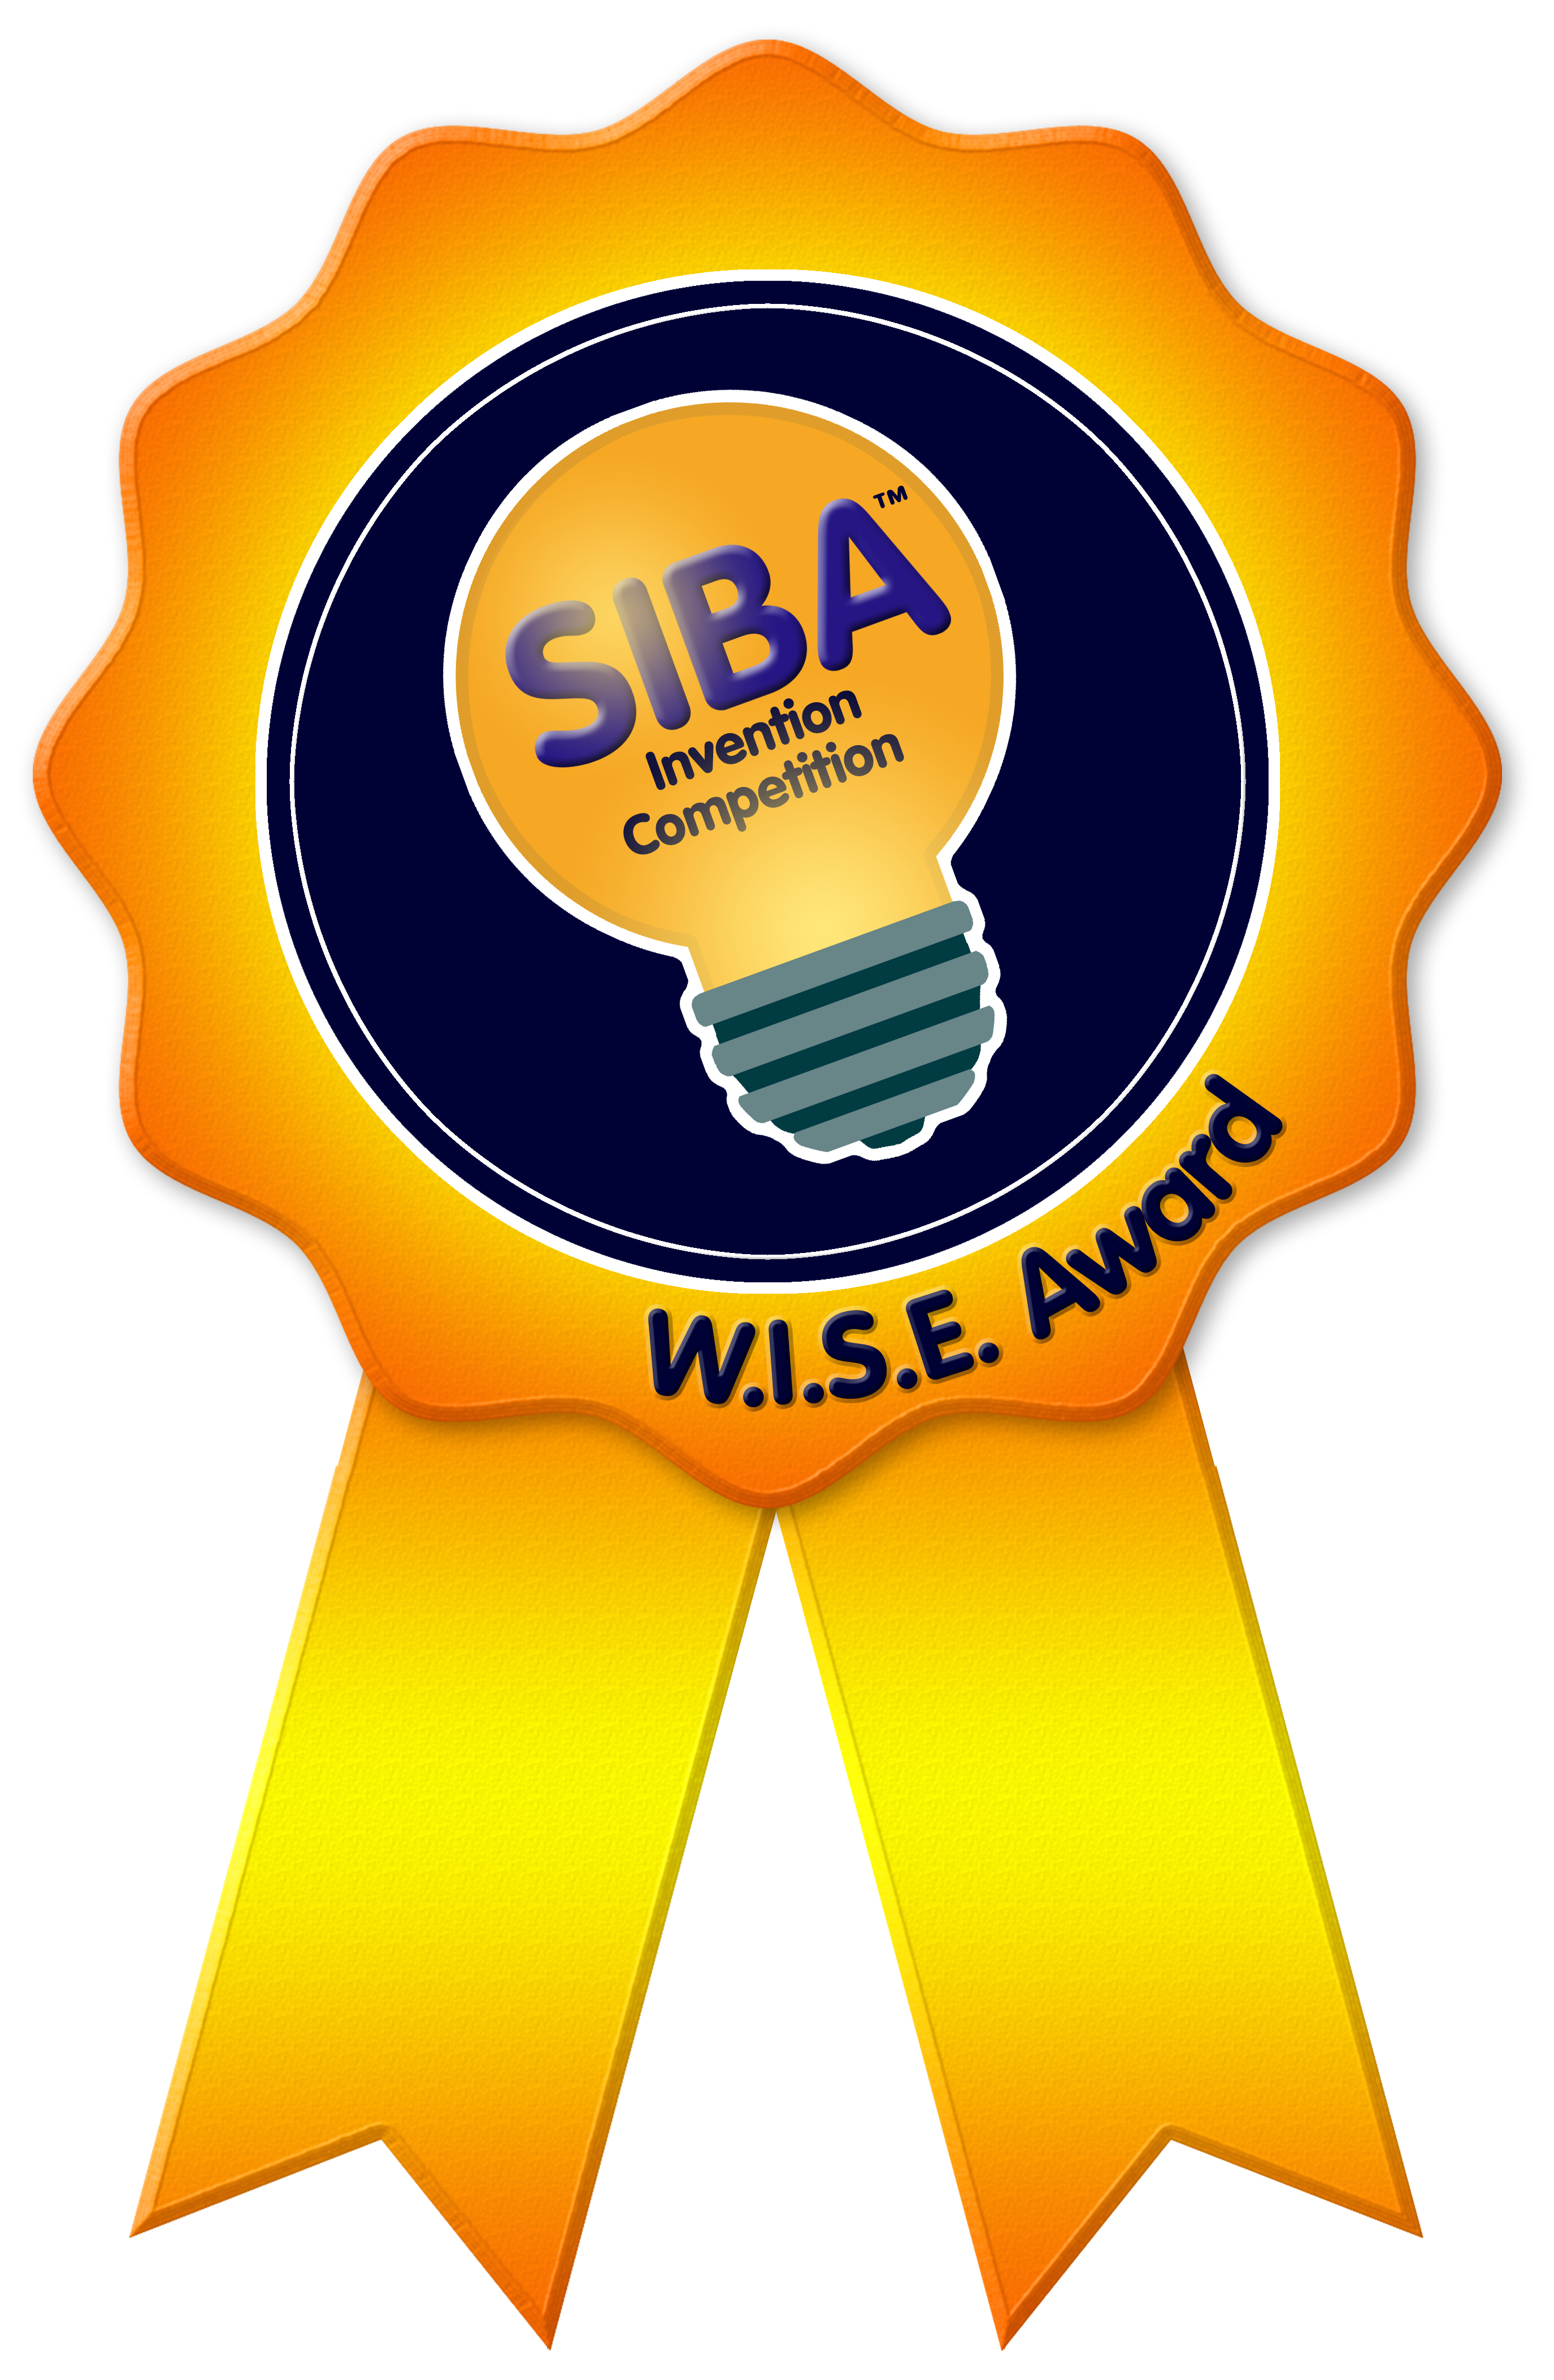 SIBA - Frances O Williamson Inventions in Science Education Award